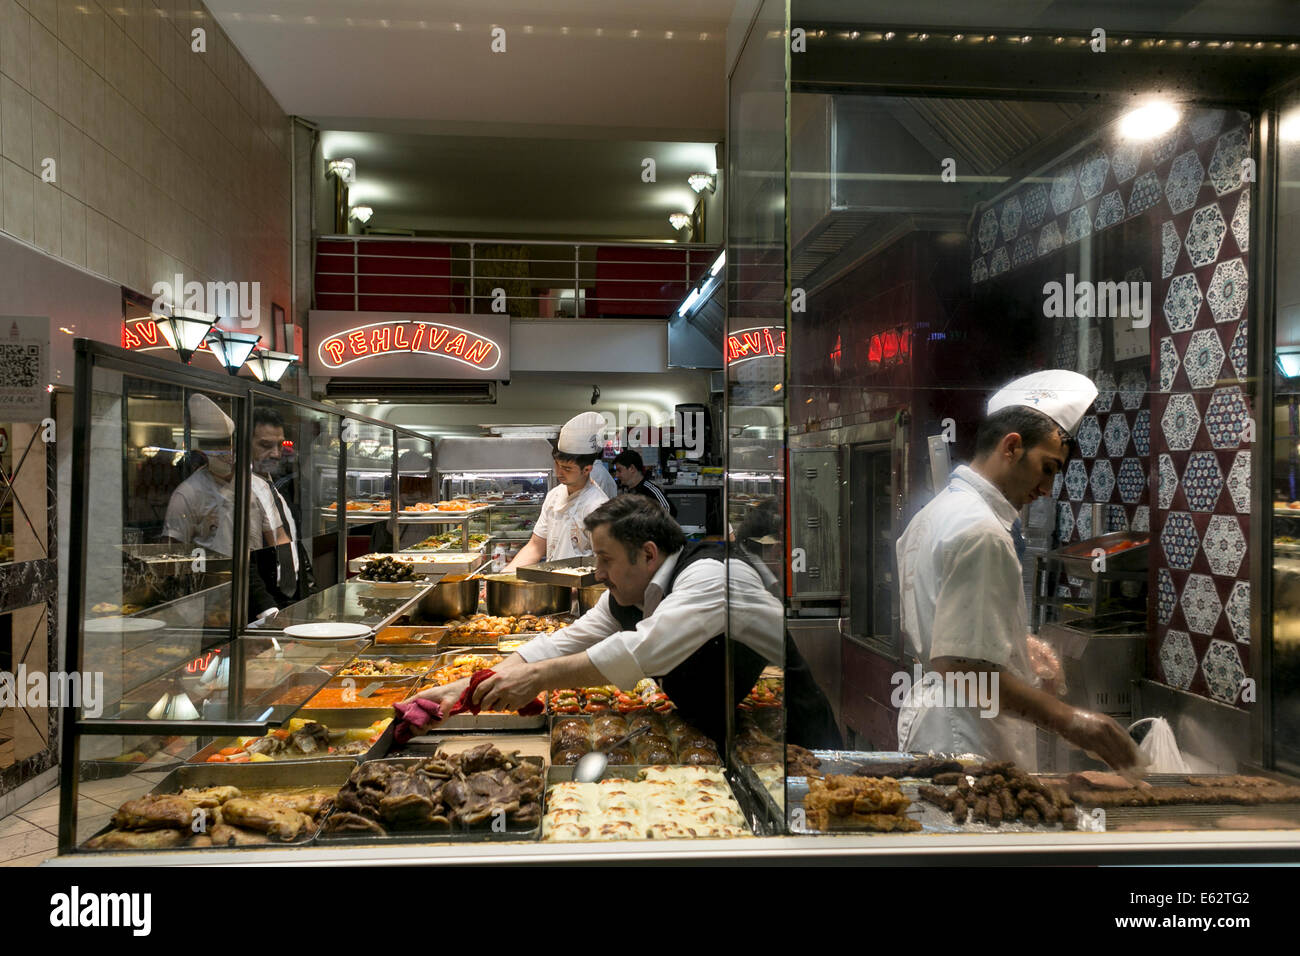 Turkish restaurant (lokanta) with traditional cooked food at Istiklal street in Istanbul, Turkey on March 2014. Stock Photo